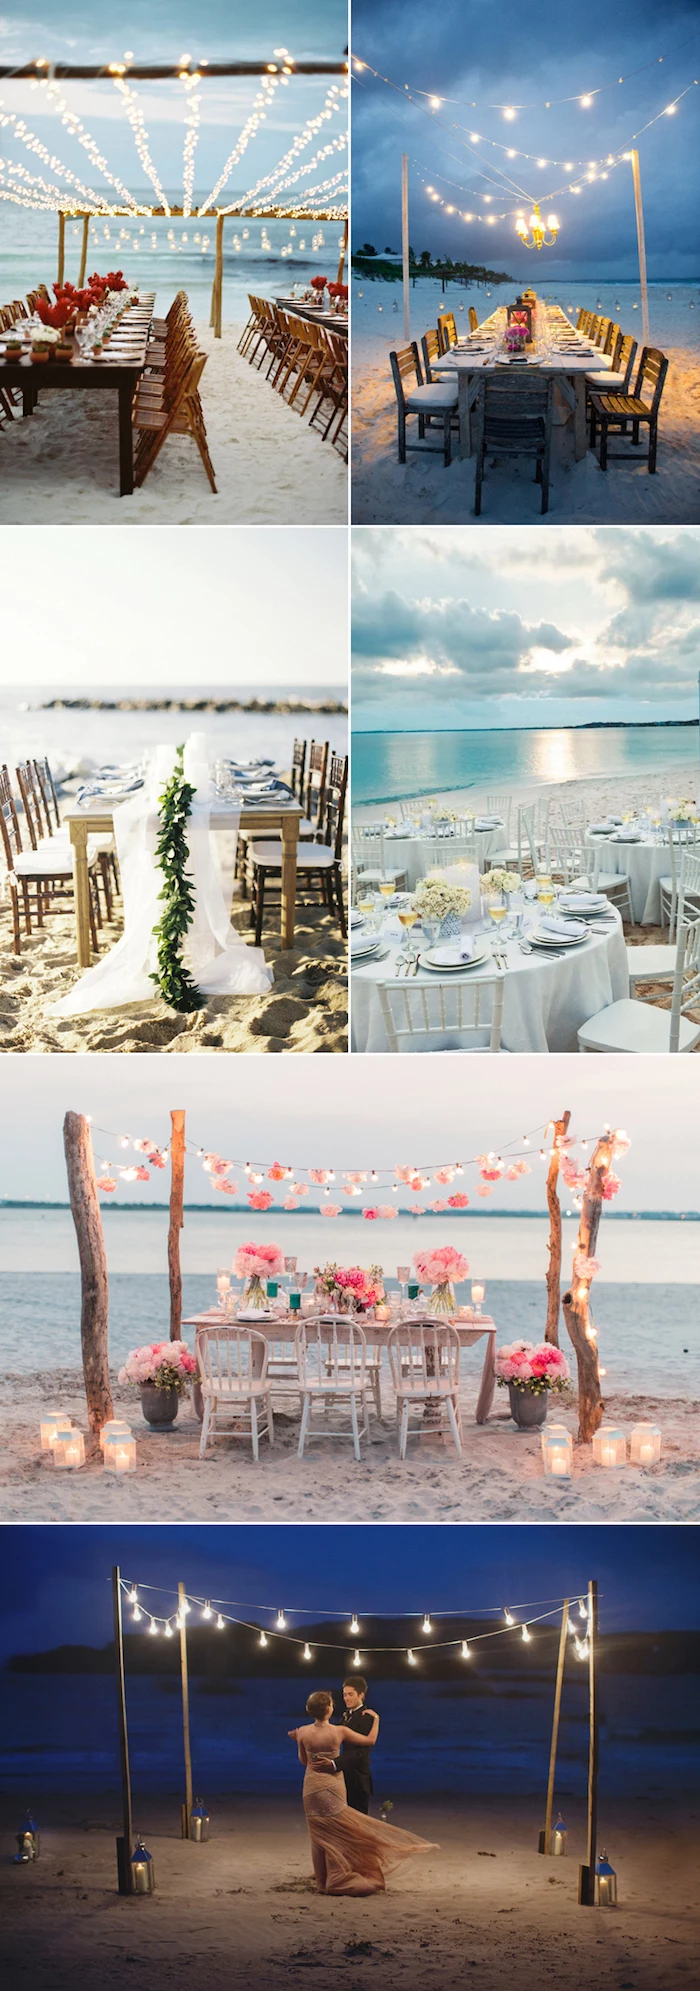 sunset and dusk weddings, six different setups, string lights and flowers, tables and chairs, one couple dancing, florida destination weddings on the beach